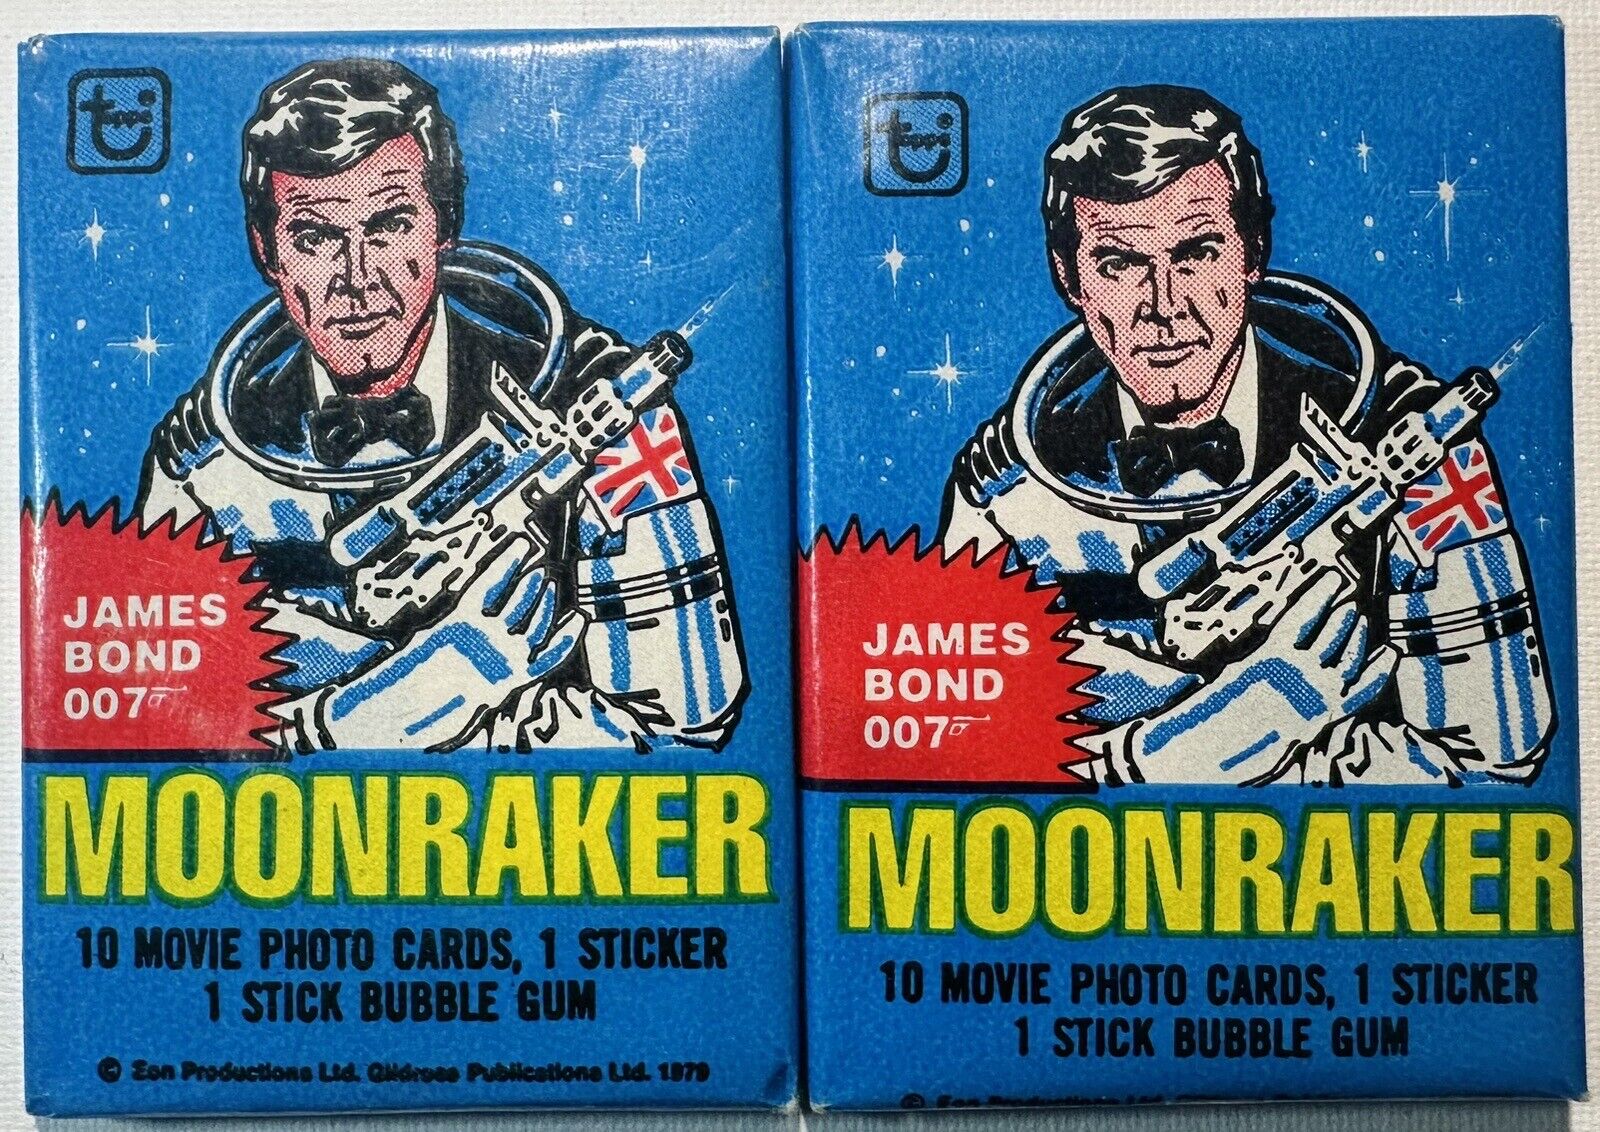 1979 TOPPS JAMES BOND 007 MOONRAKER SEALED WAX PACK MOVIE PHOTO CARDS - 10 CARDS